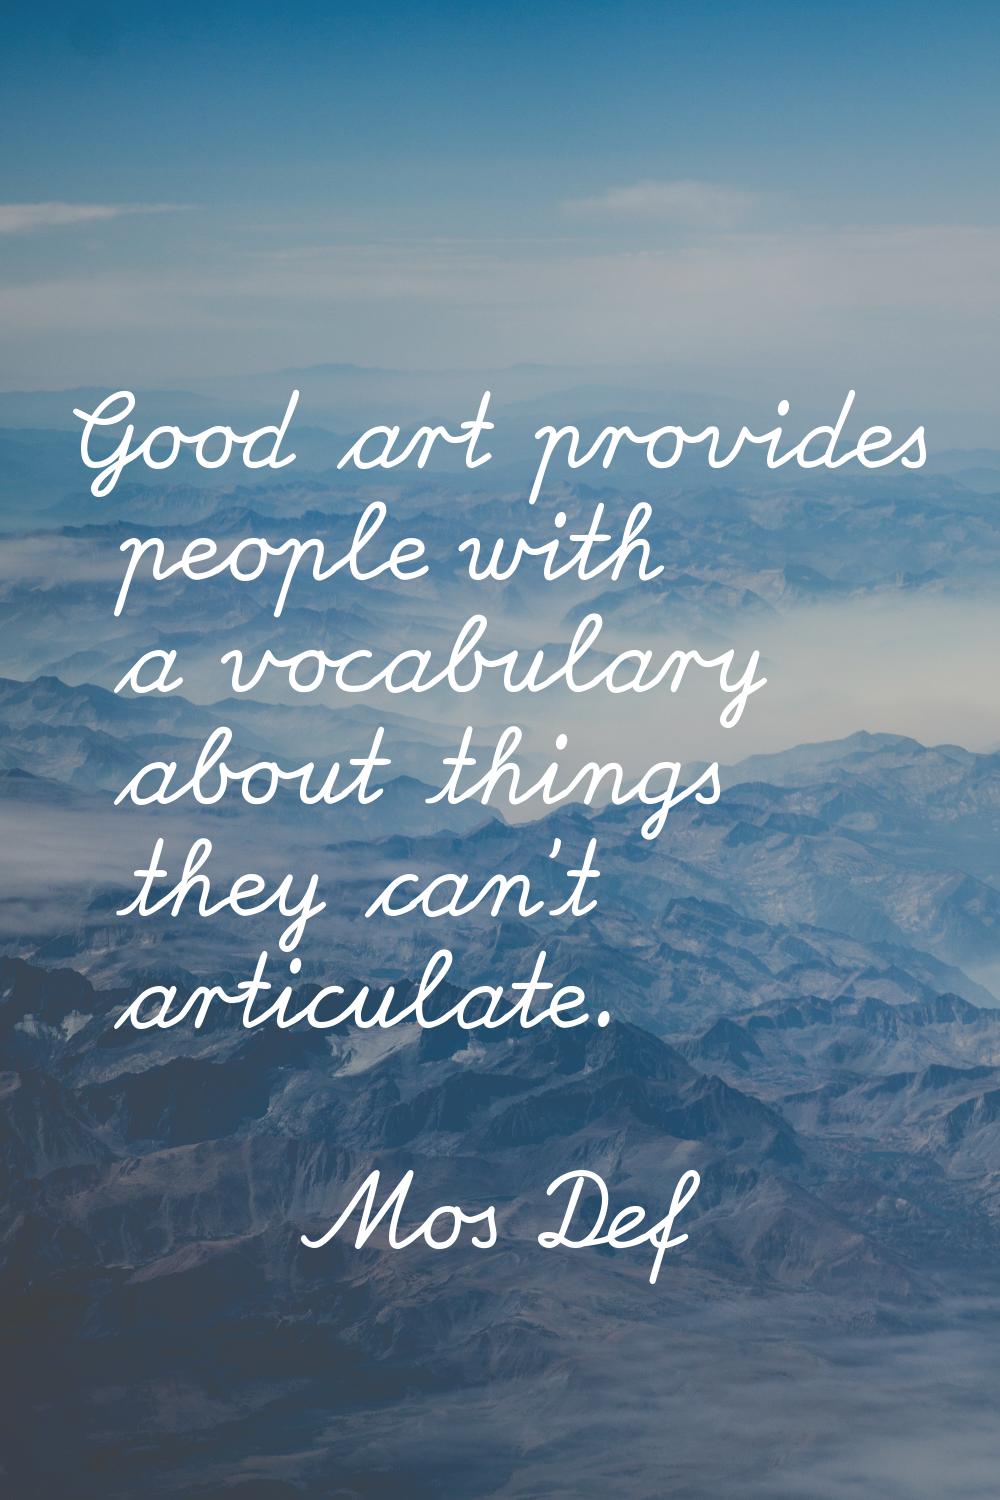 Good art provides people with a vocabulary about things they can't articulate.